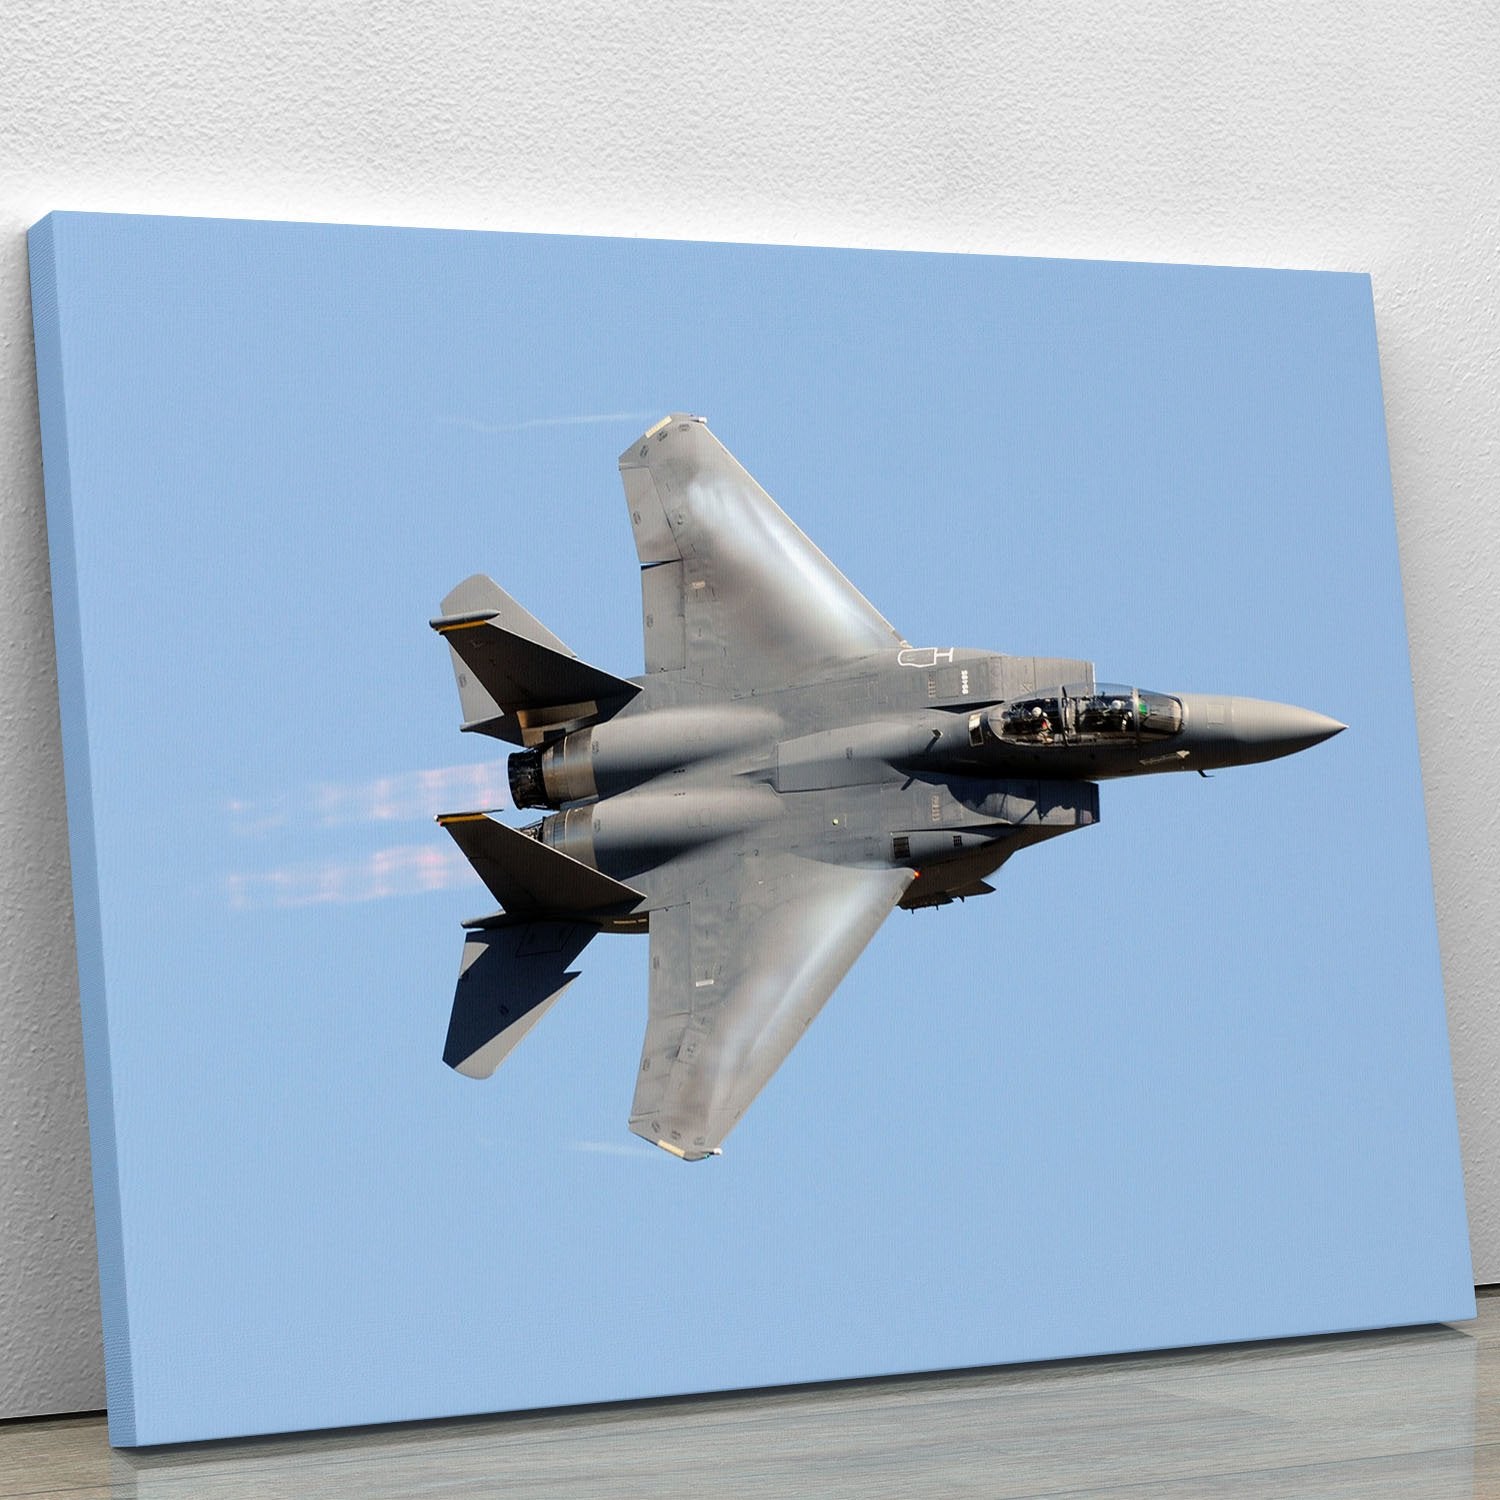 jet at high speed Canvas Print or Poster